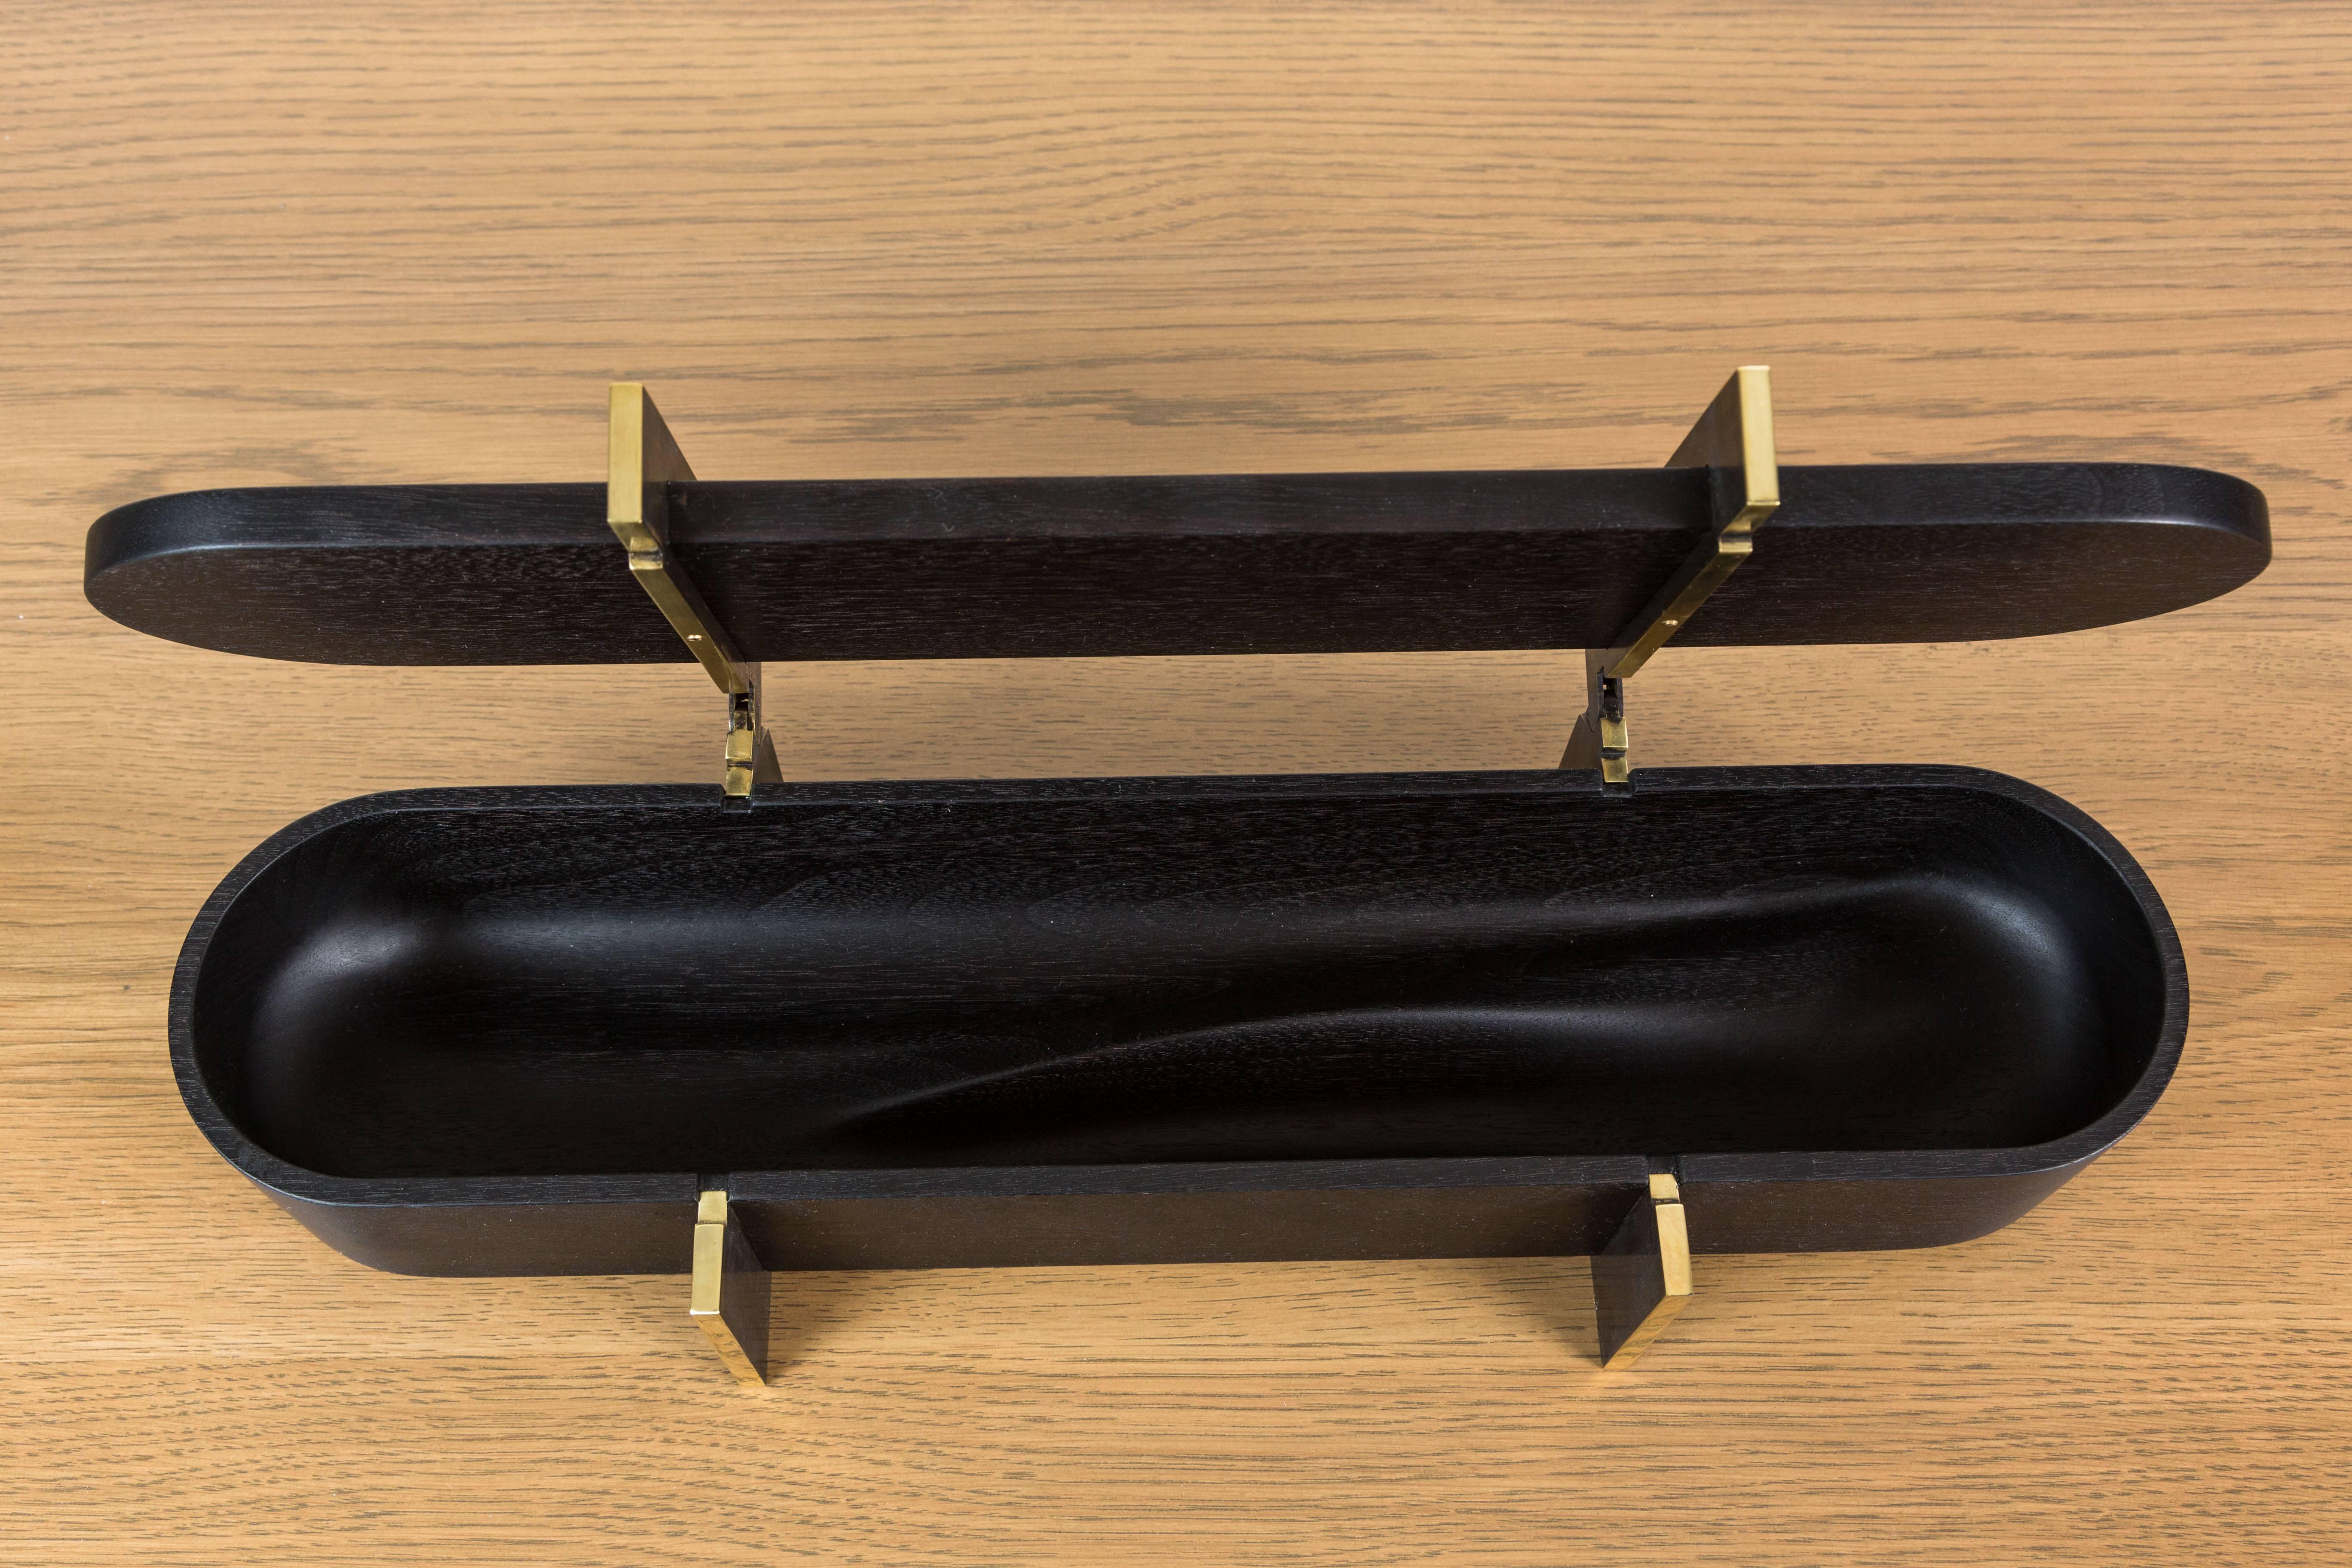 Contemporary Ebonized Walnut and Brass Lidded Box by Vincent Pocsik for Lawson-Fenning